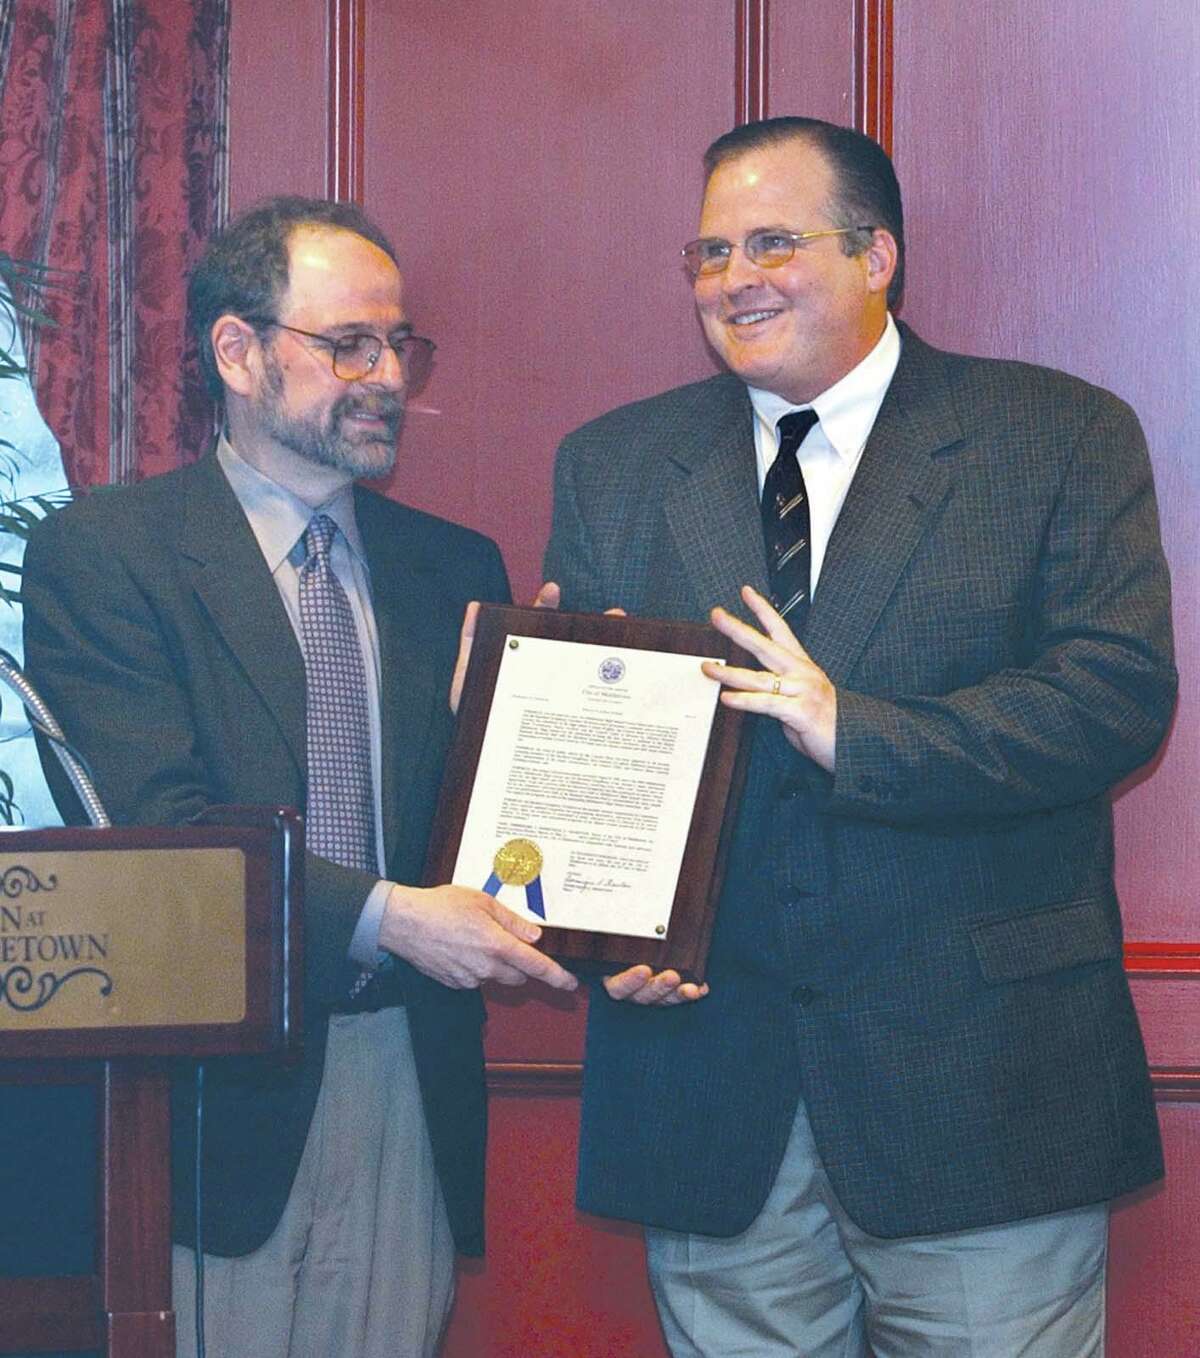 In this 2004 photo, former Middletown Commission on the Arts chairman Richard Kamins, left, presents one of two Arts Advocacy Day awards to Marco Gaylord, director of the Middletown High School Band, at a ceremony at The Inn at Middletown.